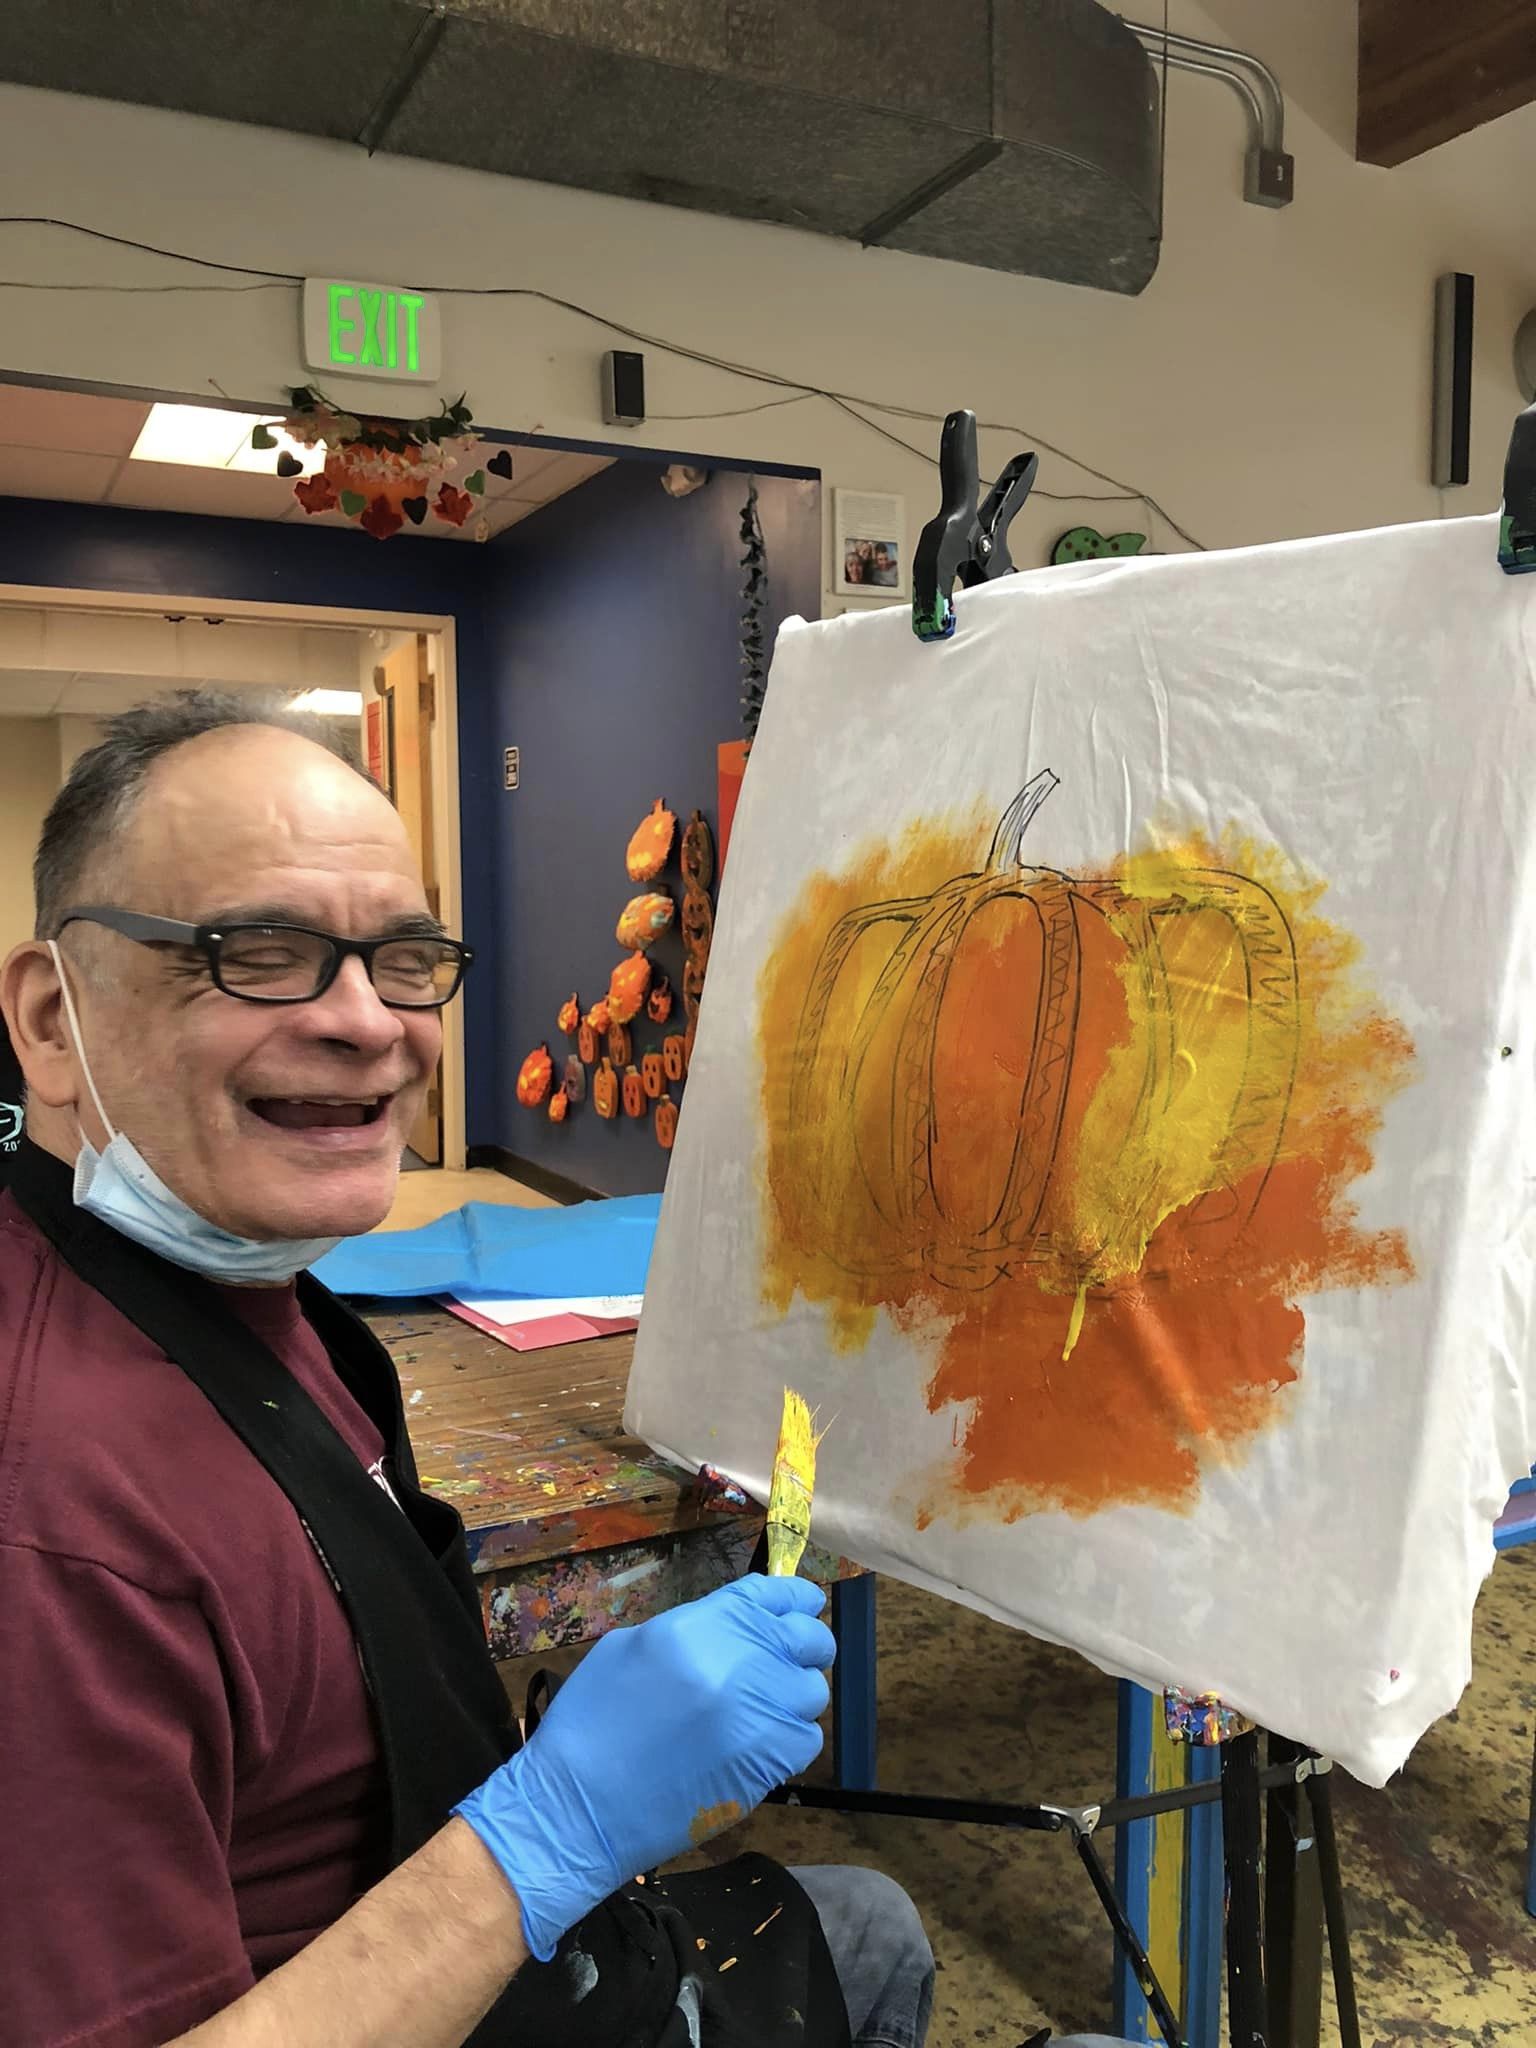 A man smiles while painting a pumpkin on a canvas